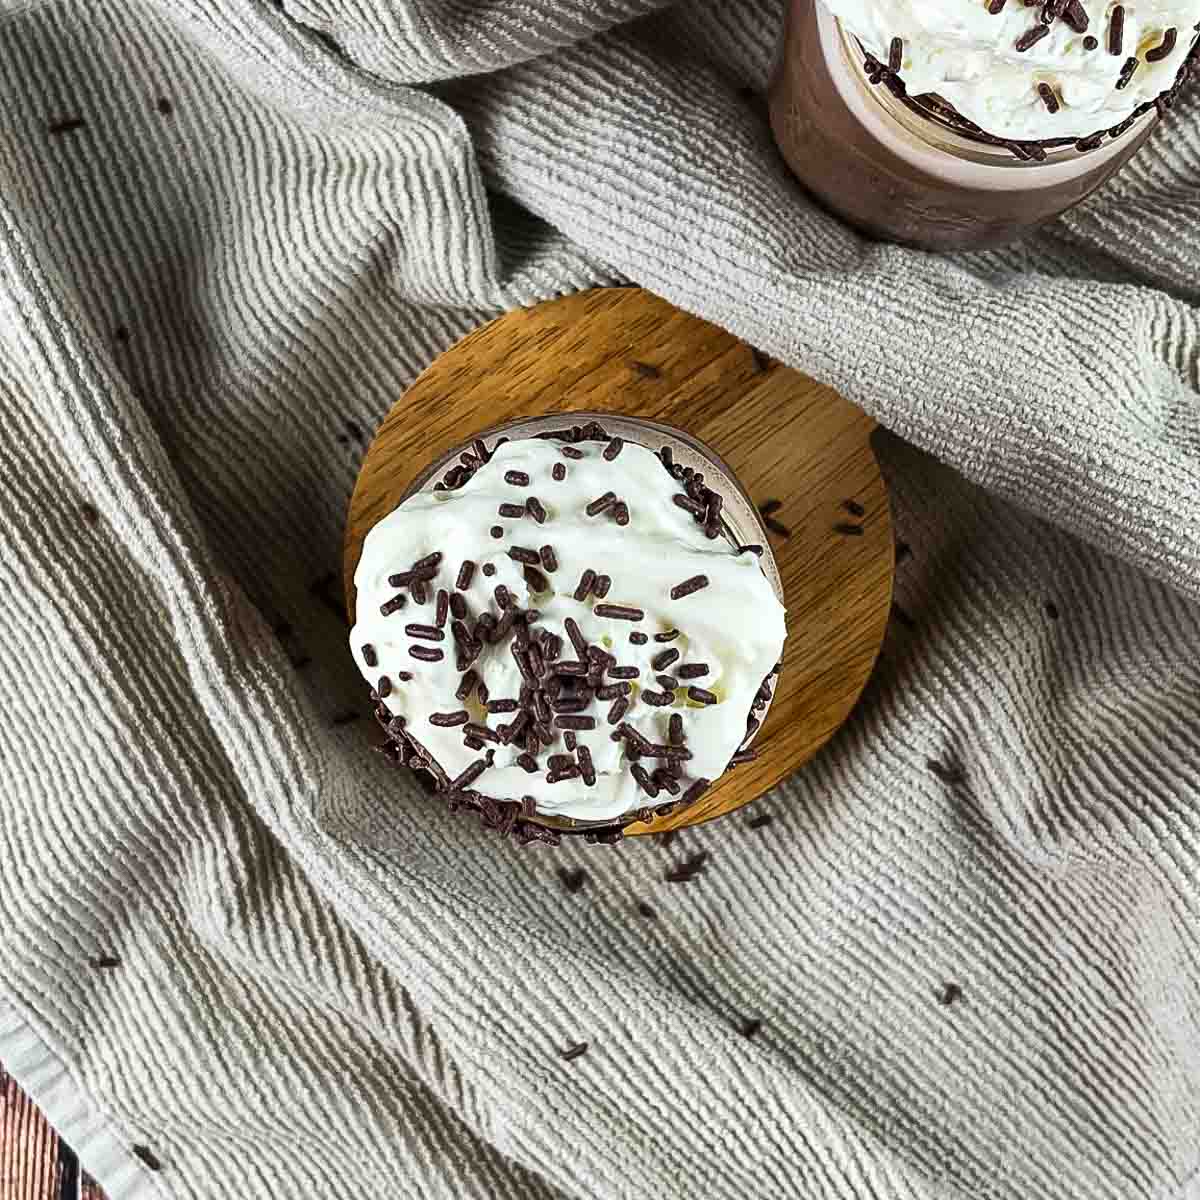 The mug topped with whipped cream and chocolate sprinkles.